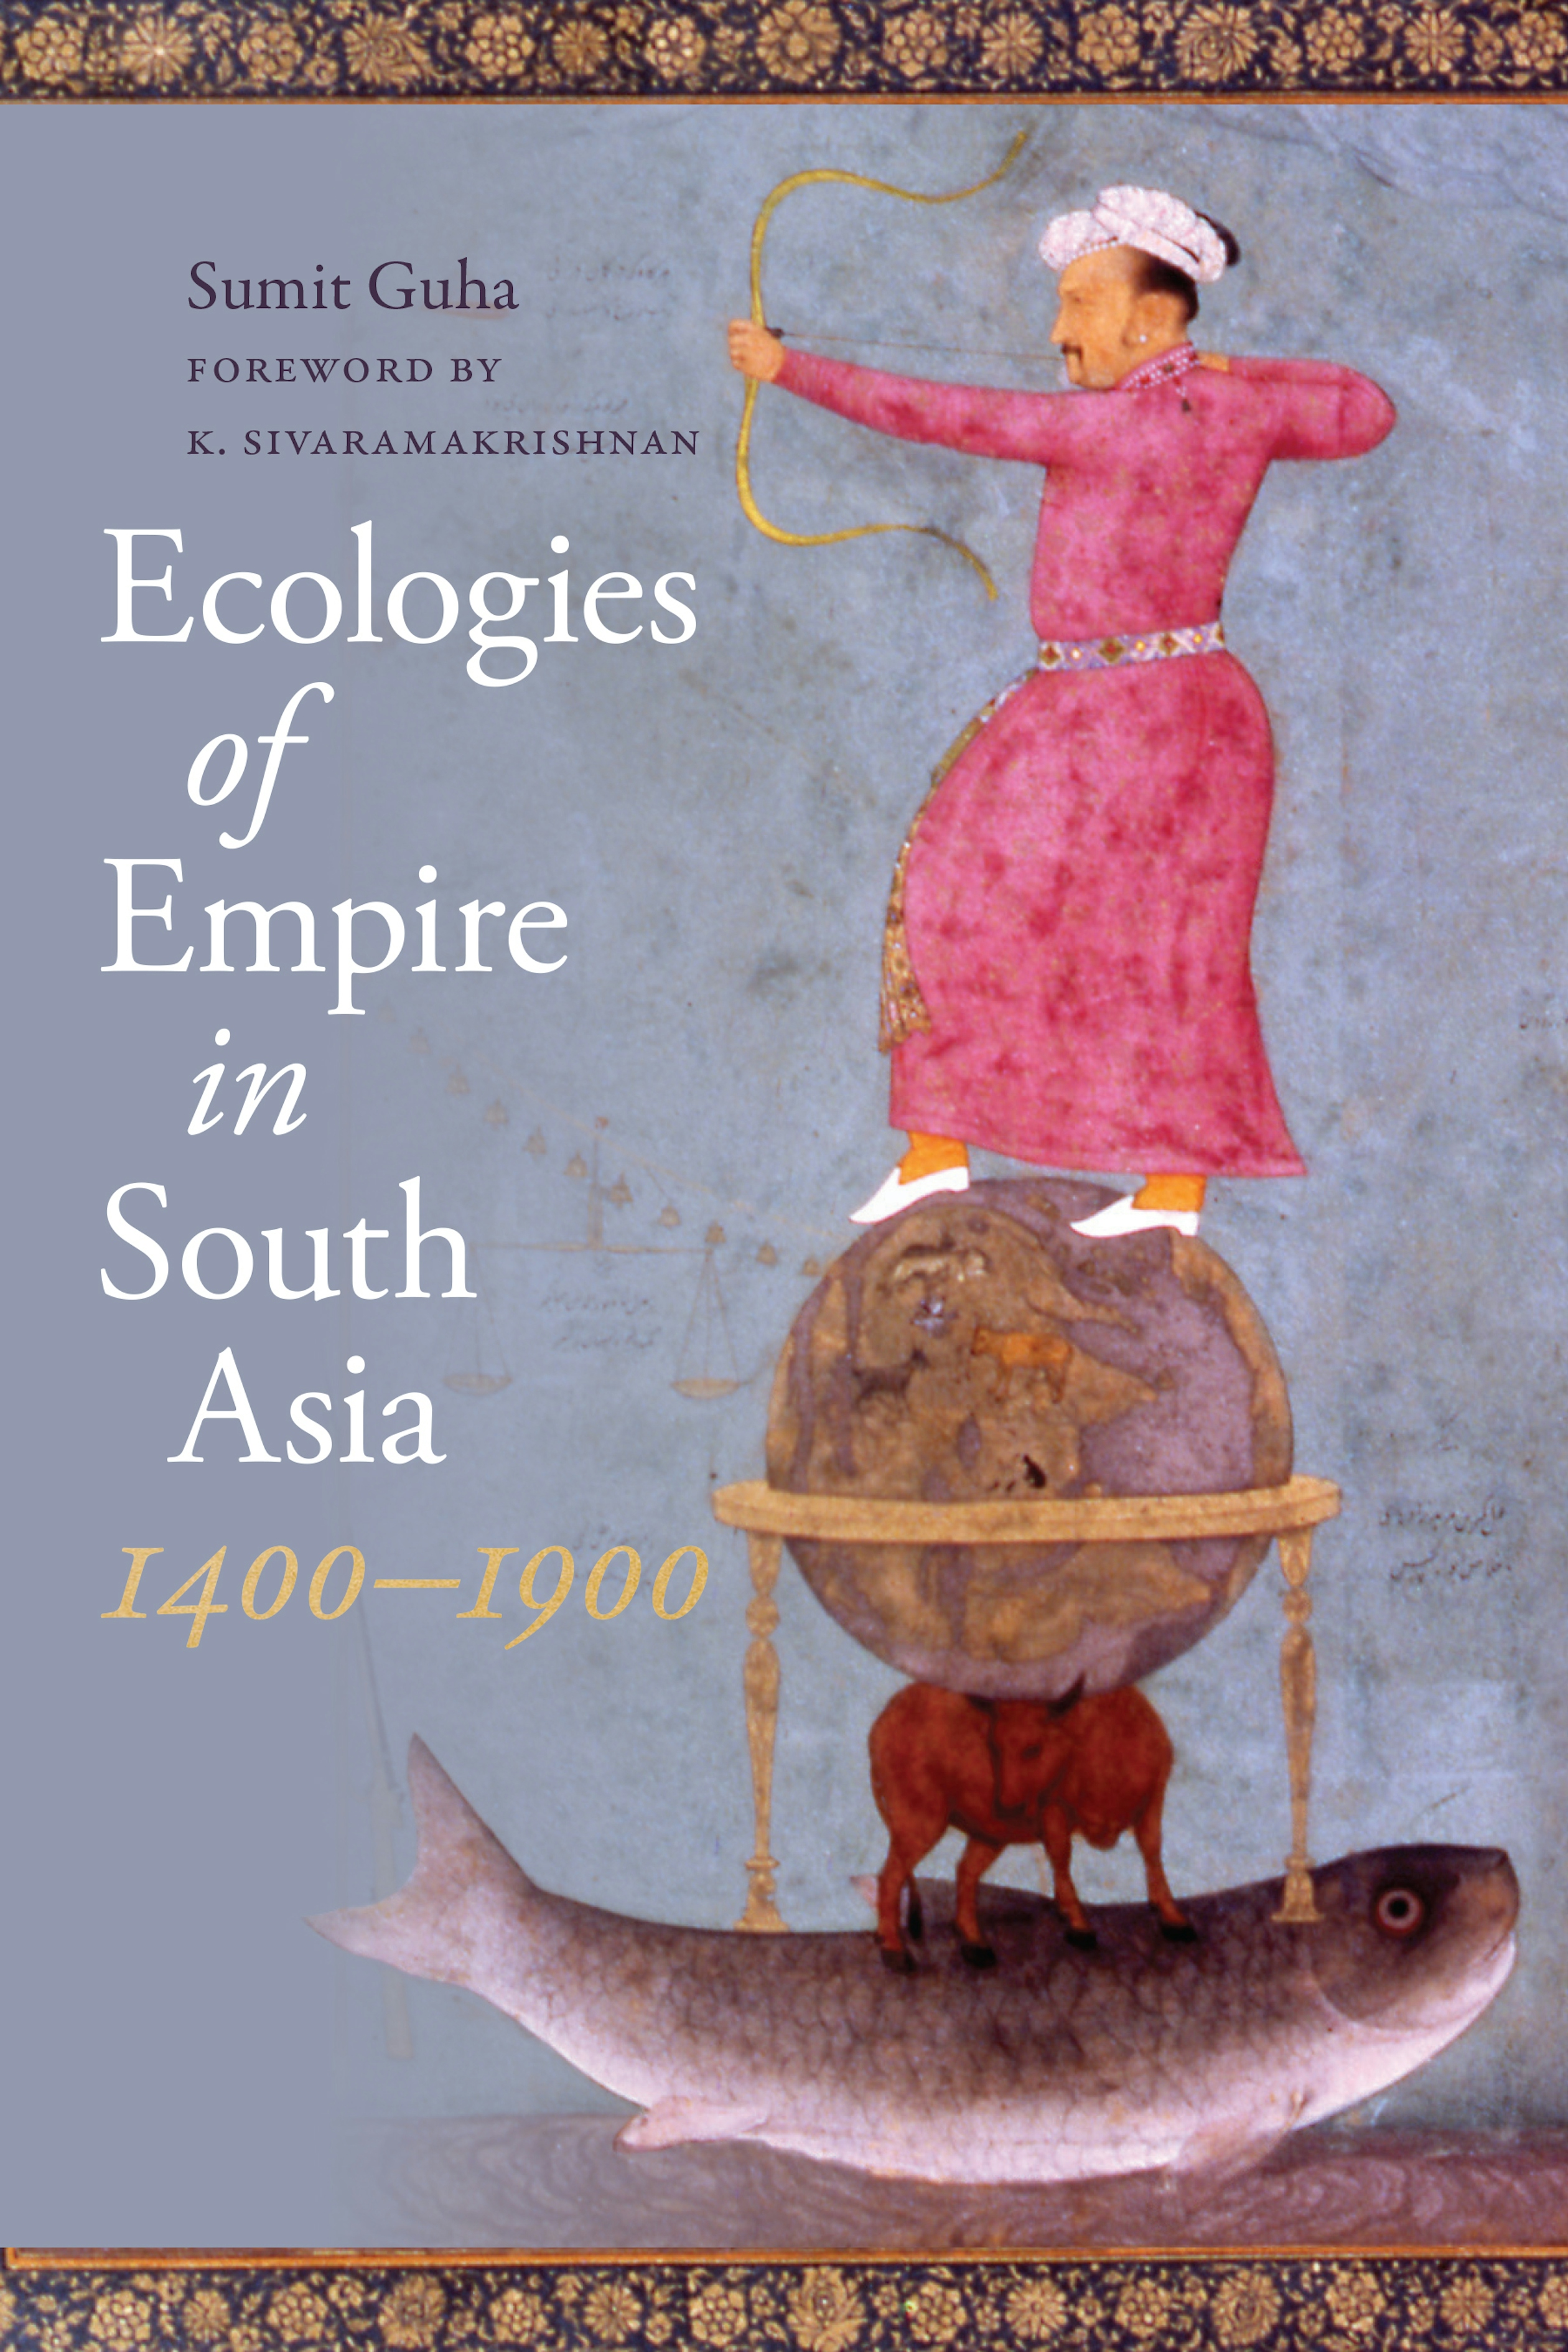 Ecologies of Empire in South Asia, 1400-1900